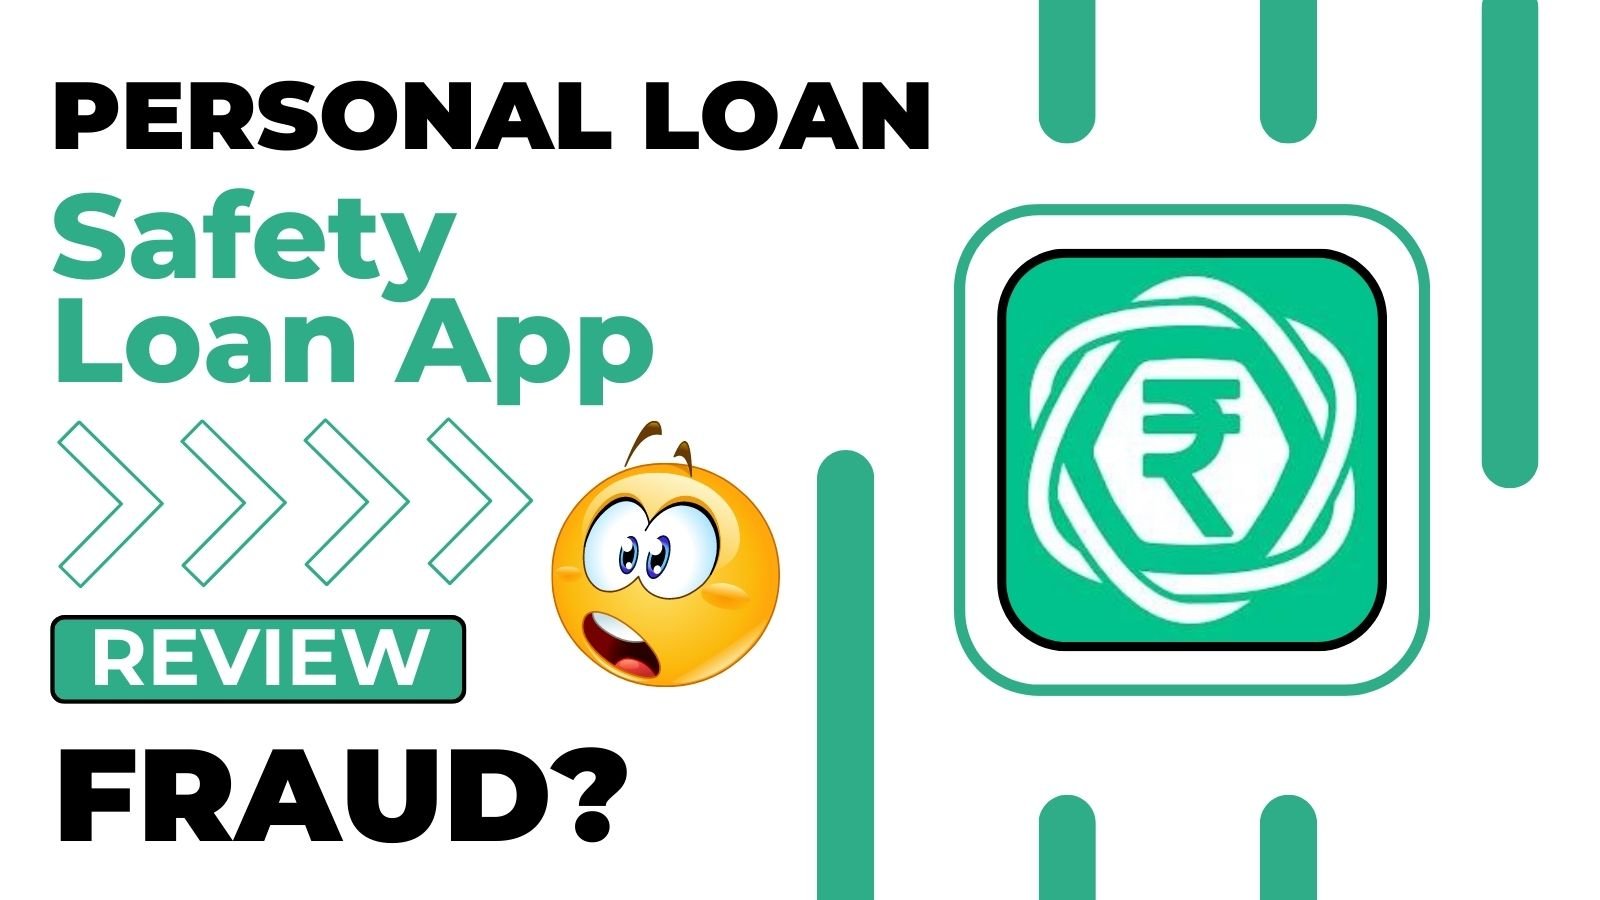 Safety Loan App Review